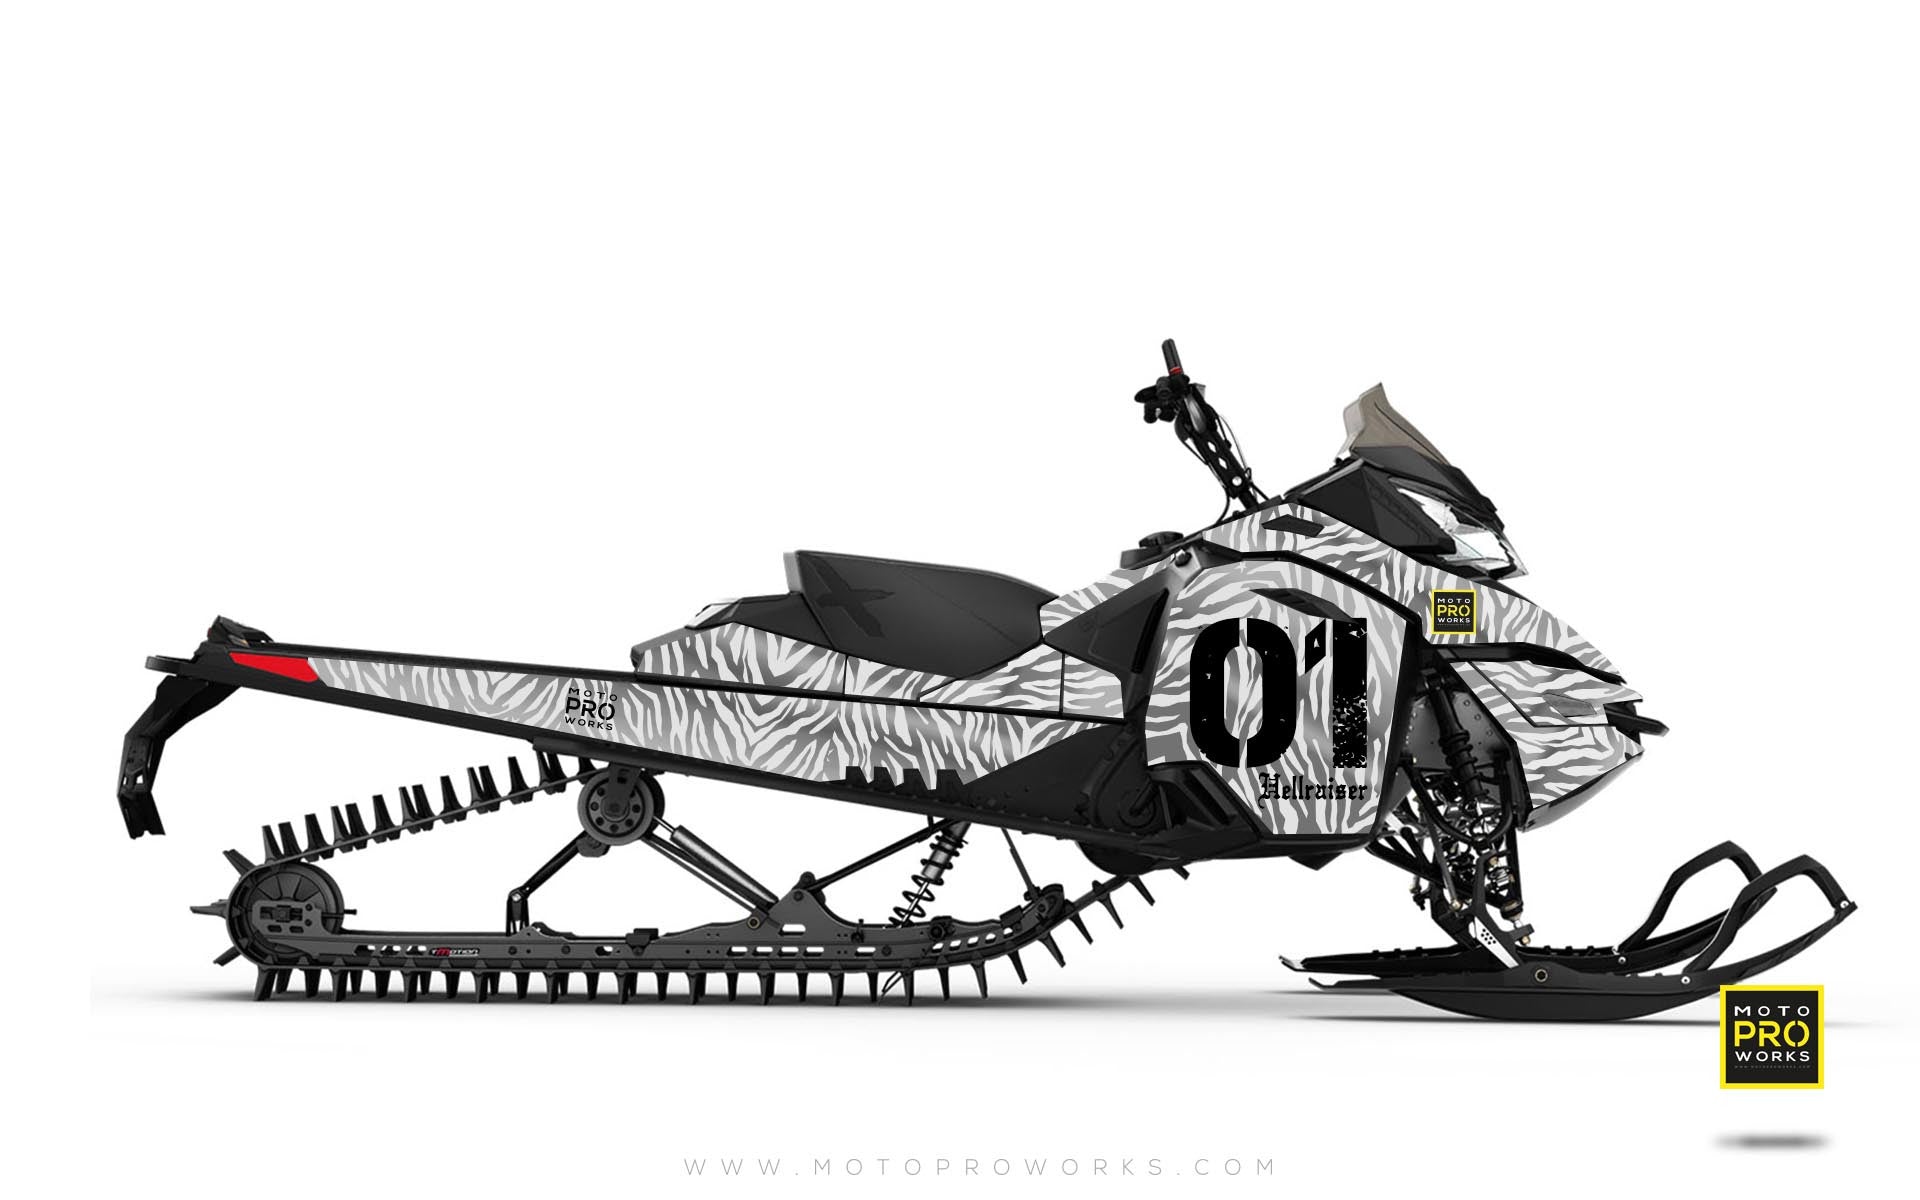 Ski-Doo Graphics - "Stripey" (solid white) - MotoProWorks | Decals and Bike Graphic kit